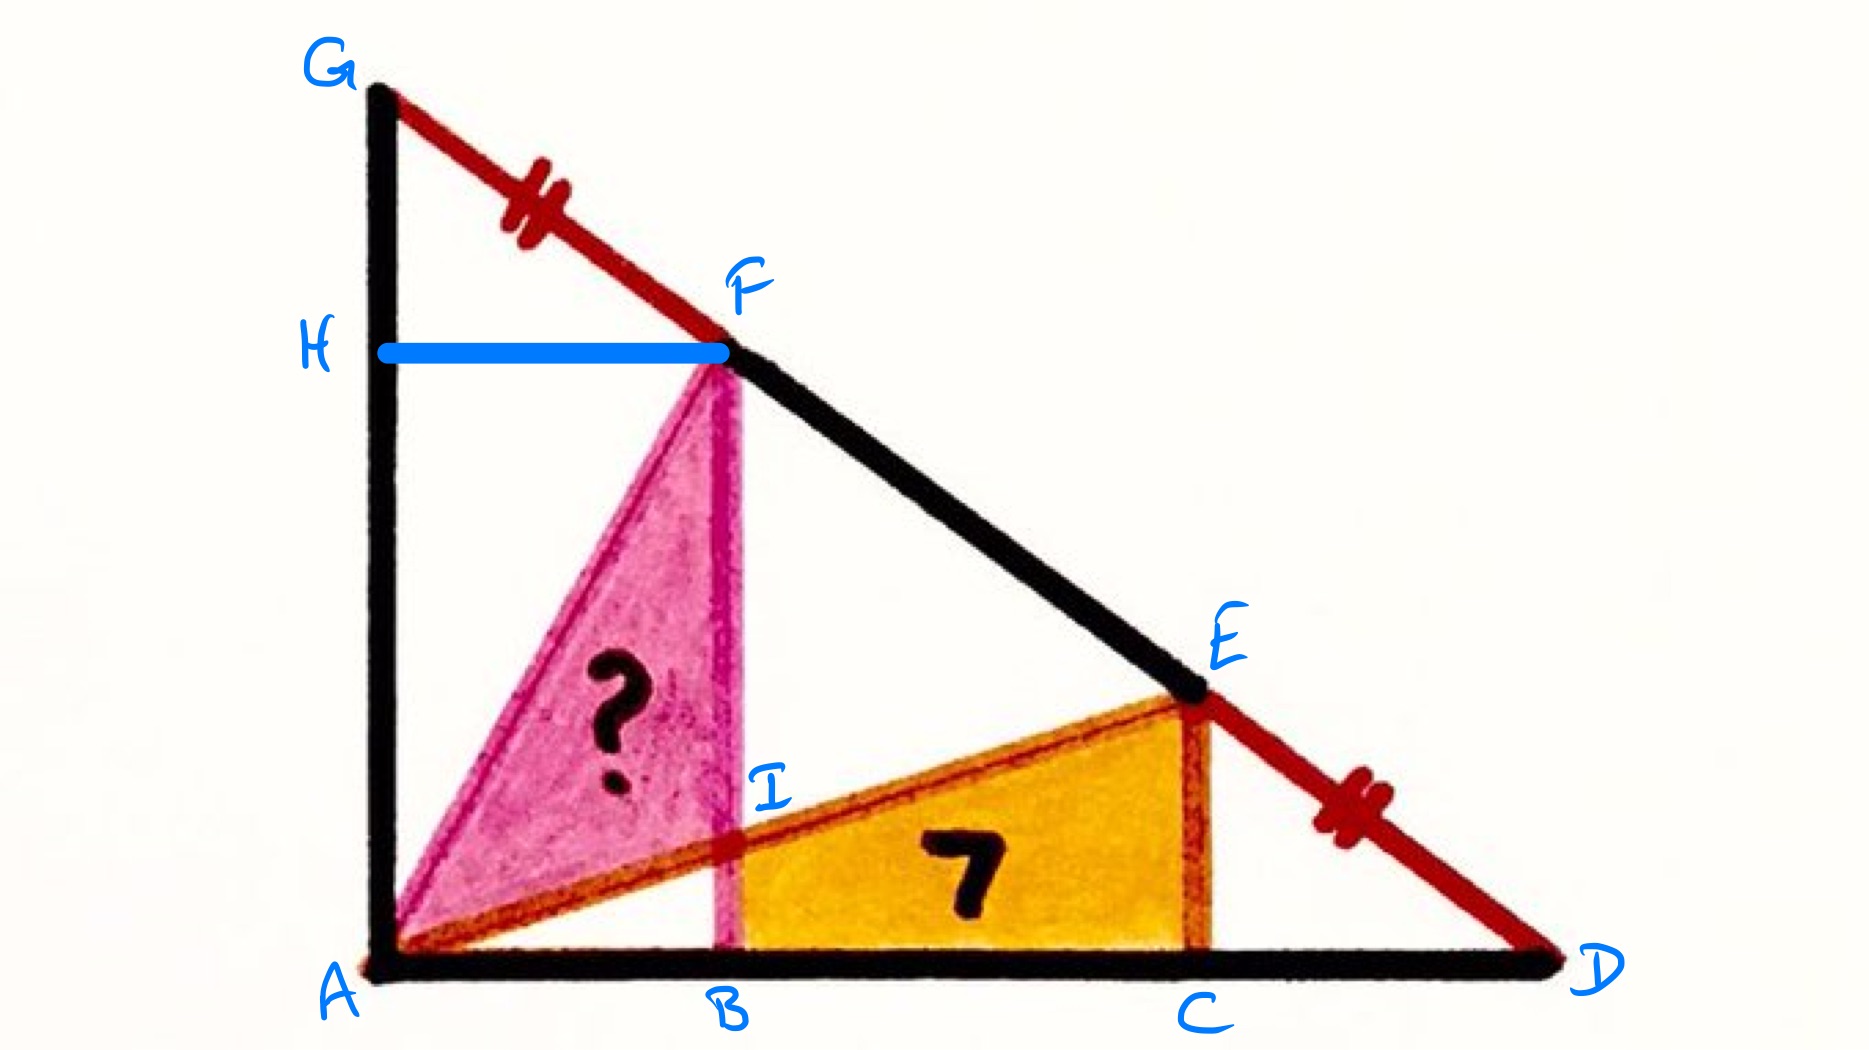 Three right-angled triangles labelled